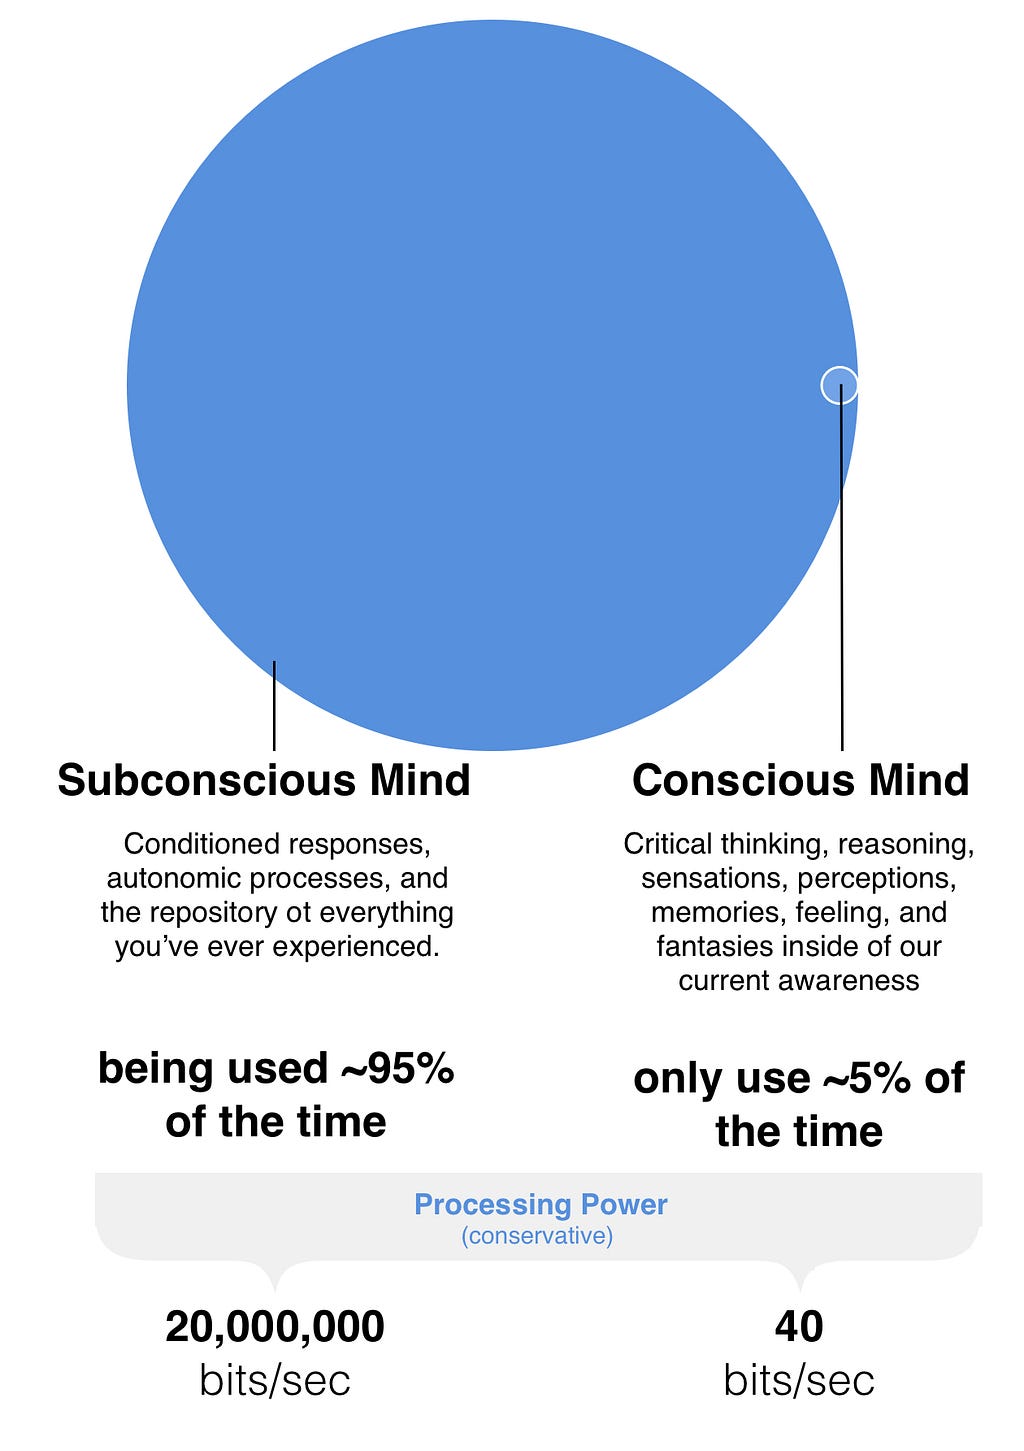 Your subconscious mind is about 500,000% more powerful than your conscious mind